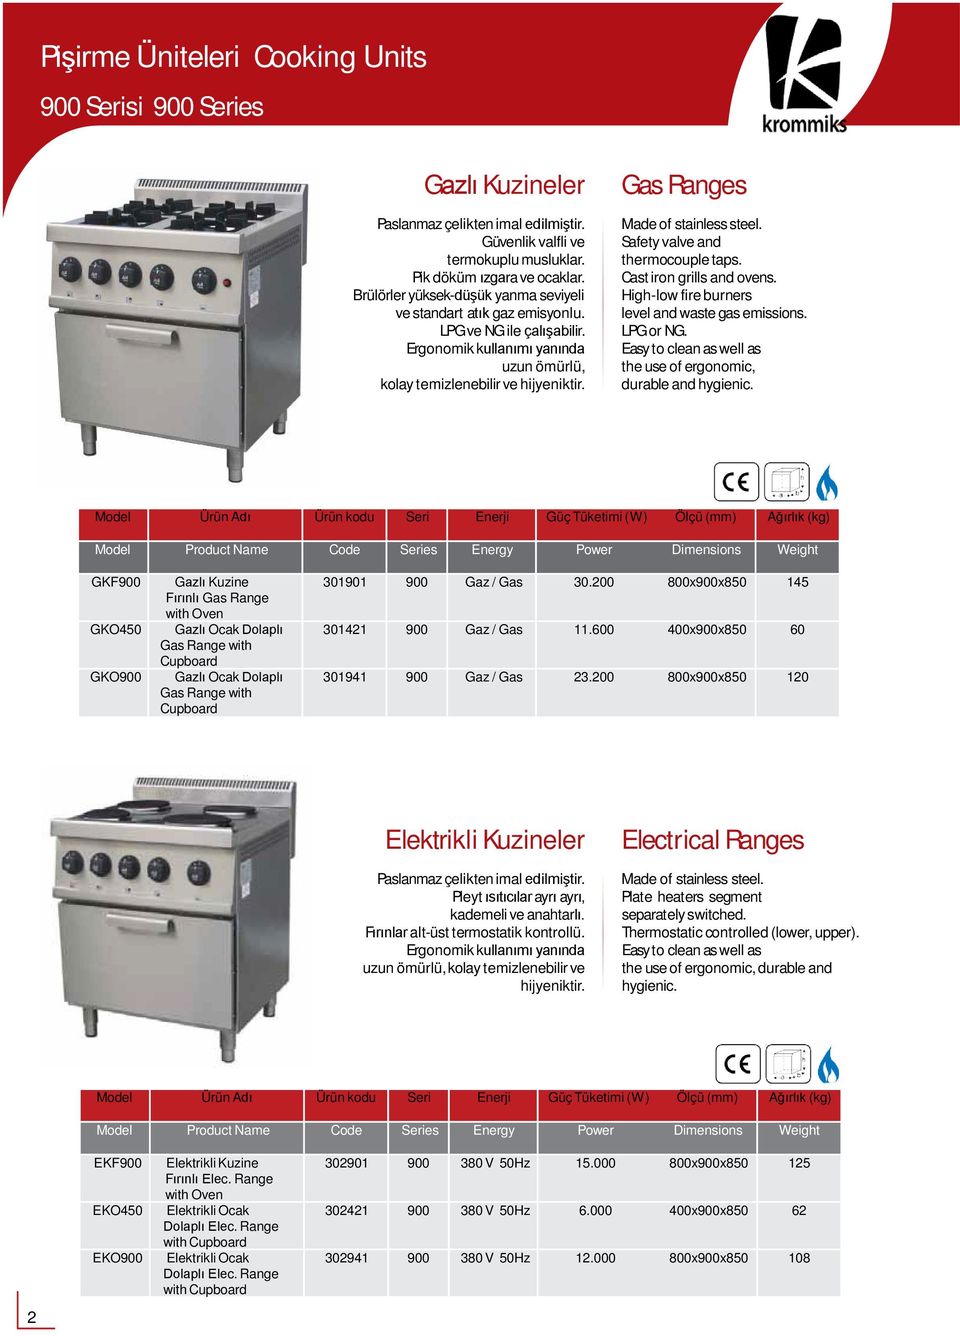 Gas Ranges Safety valve and thermocouple taps. Cast iron grills and ovens. High-low fire burners level and waste gas emissions. LPGor NG.